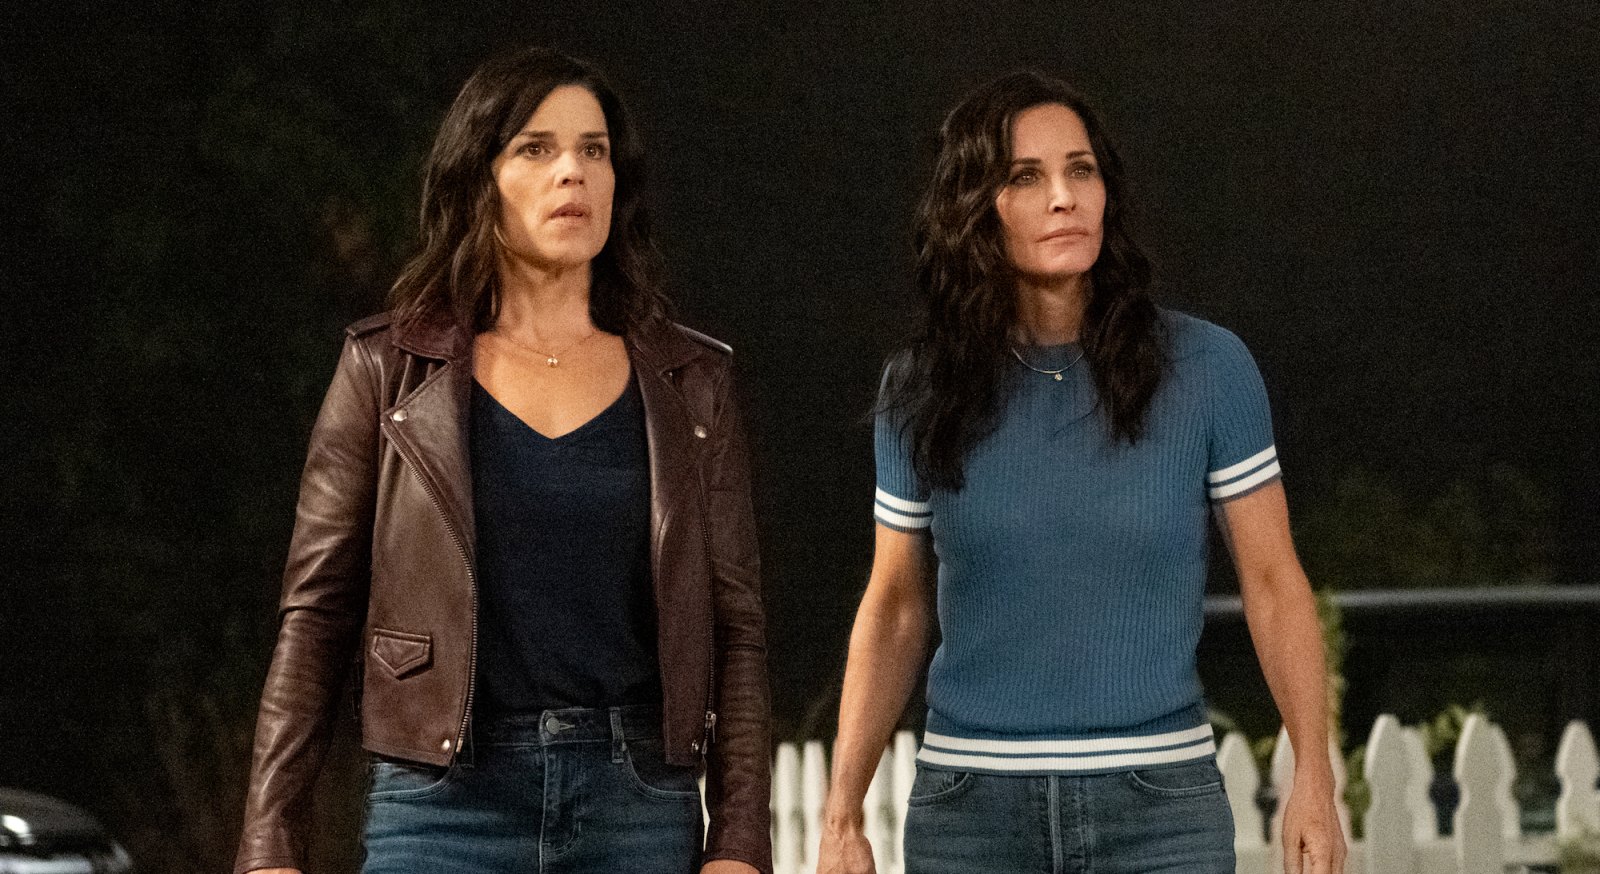 A still from Scream (2022) shows Neve Campbell and Courtney Cox as Sydney Prescott and Gale Weathers standing in front of a white picket fence